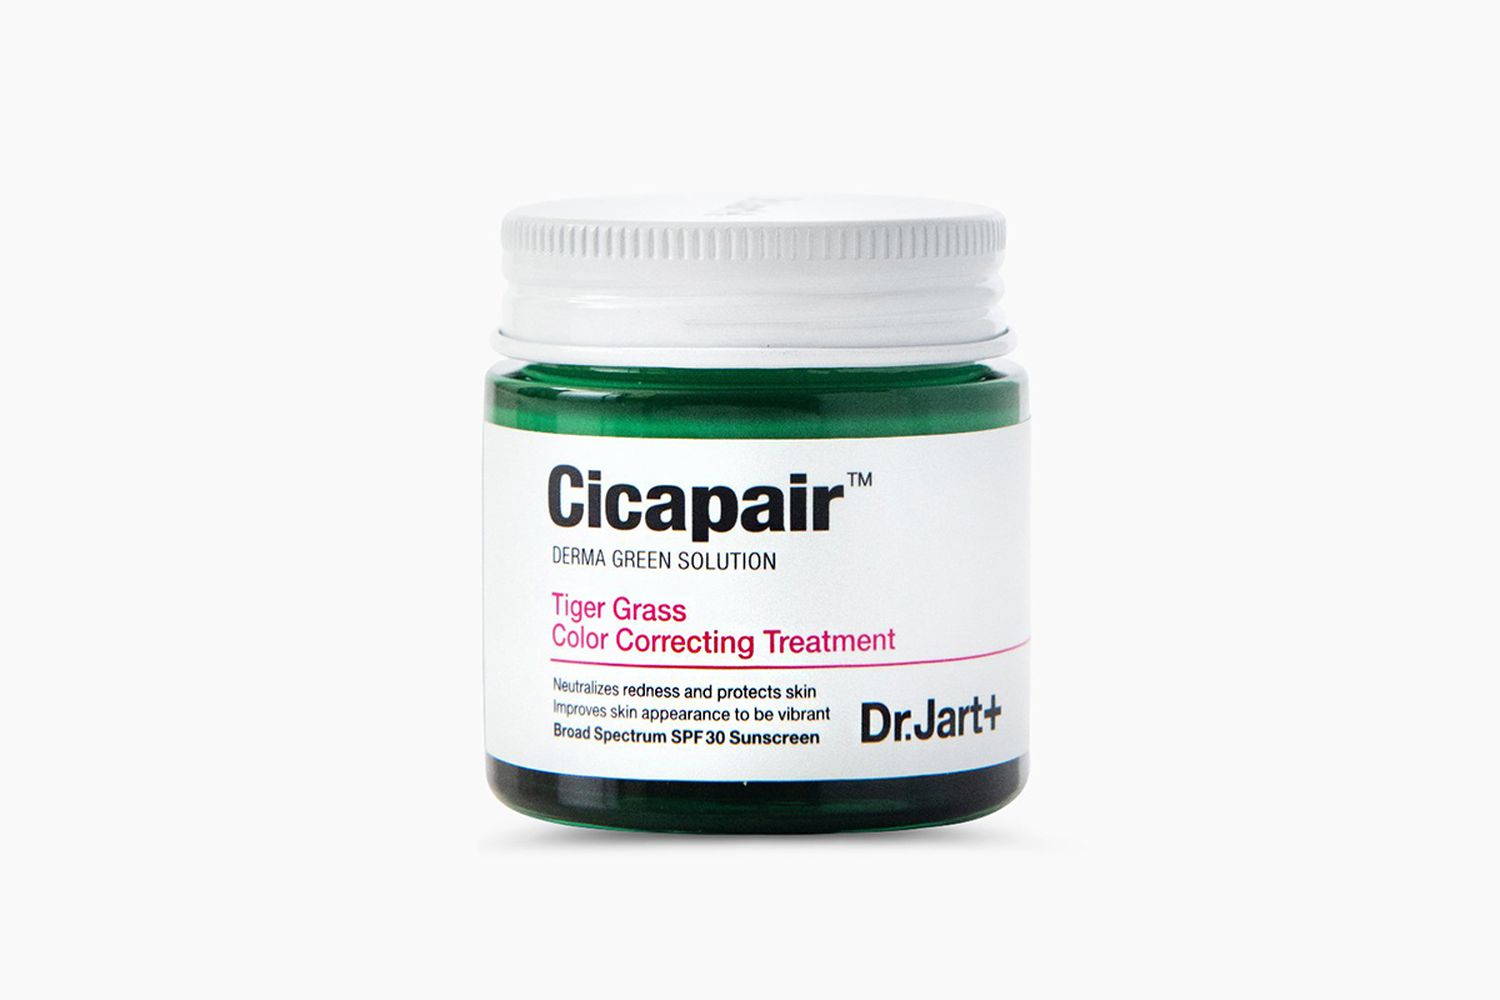 Cicapair™ Tiger Grass Color Correcting Treatment SPF30